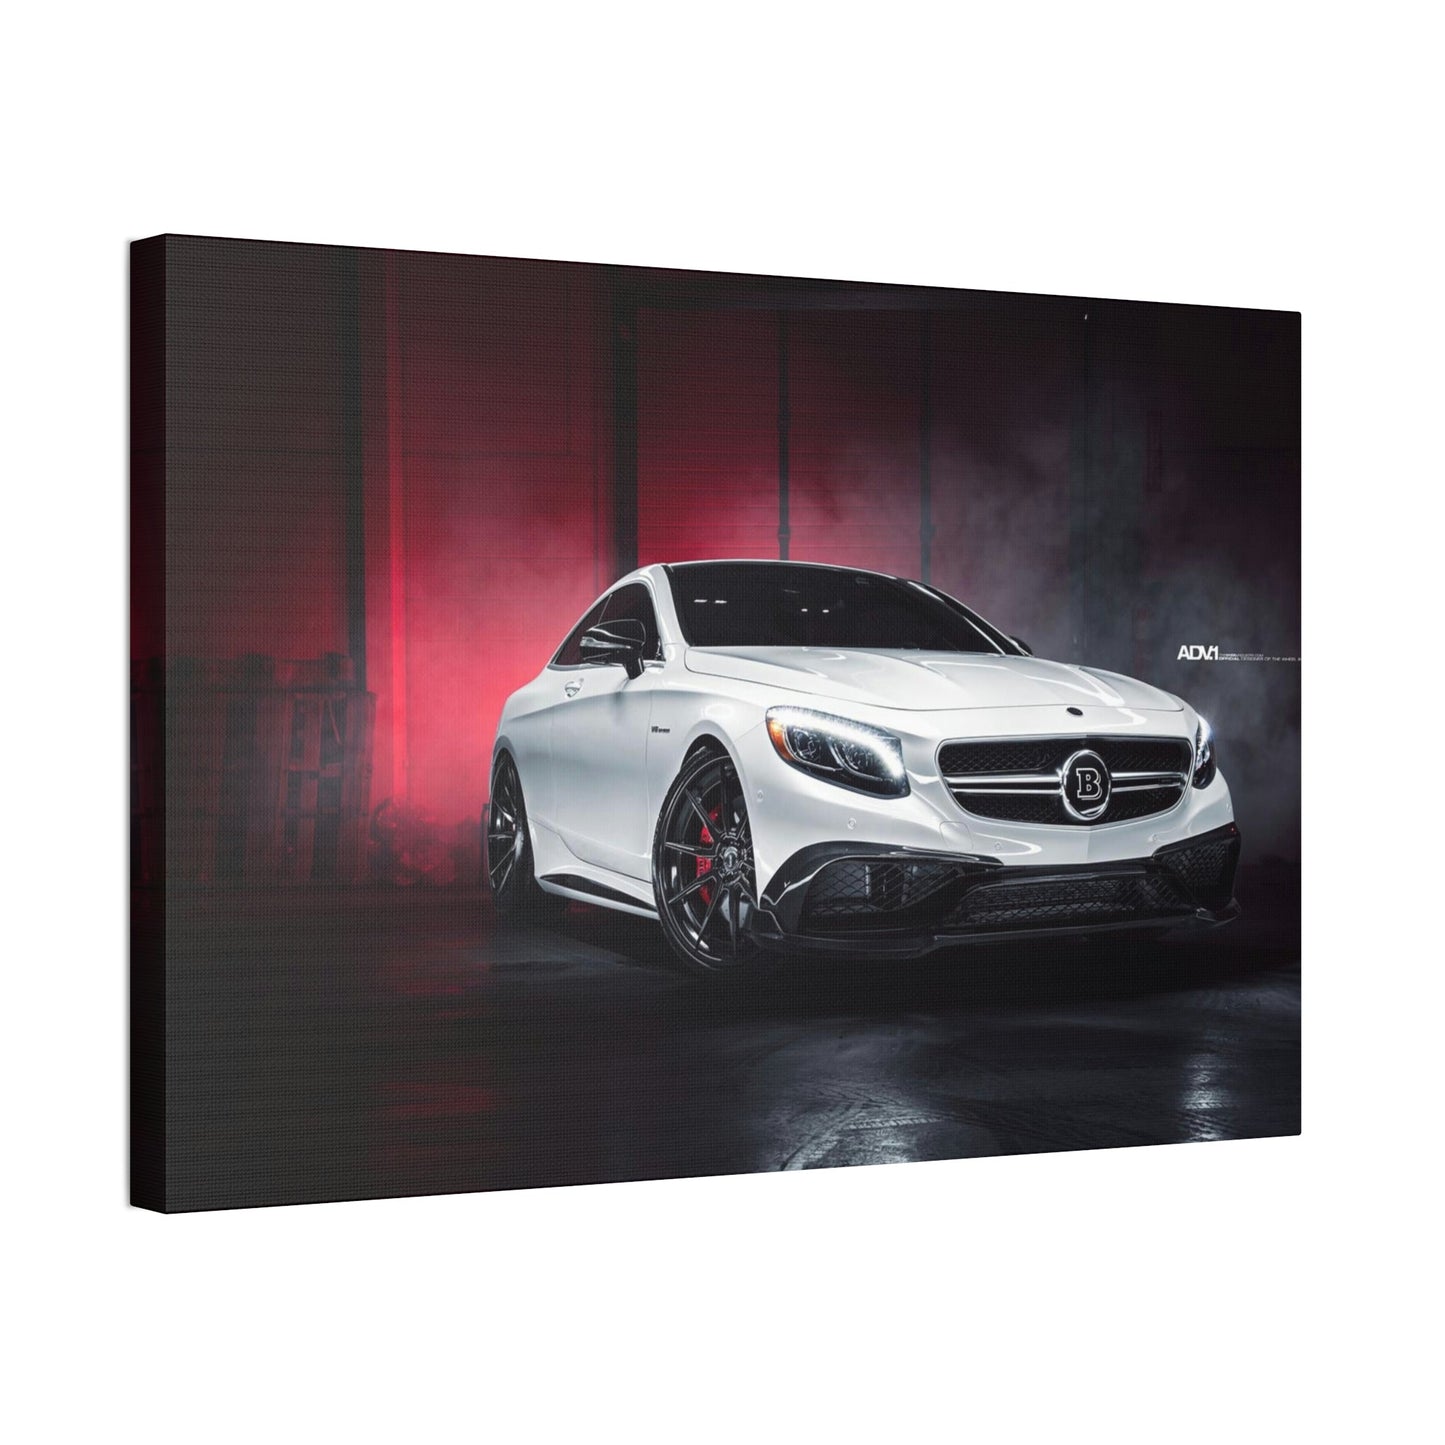 The Power of Brabus: Poster & Canvas Print for Car Enthusiasts